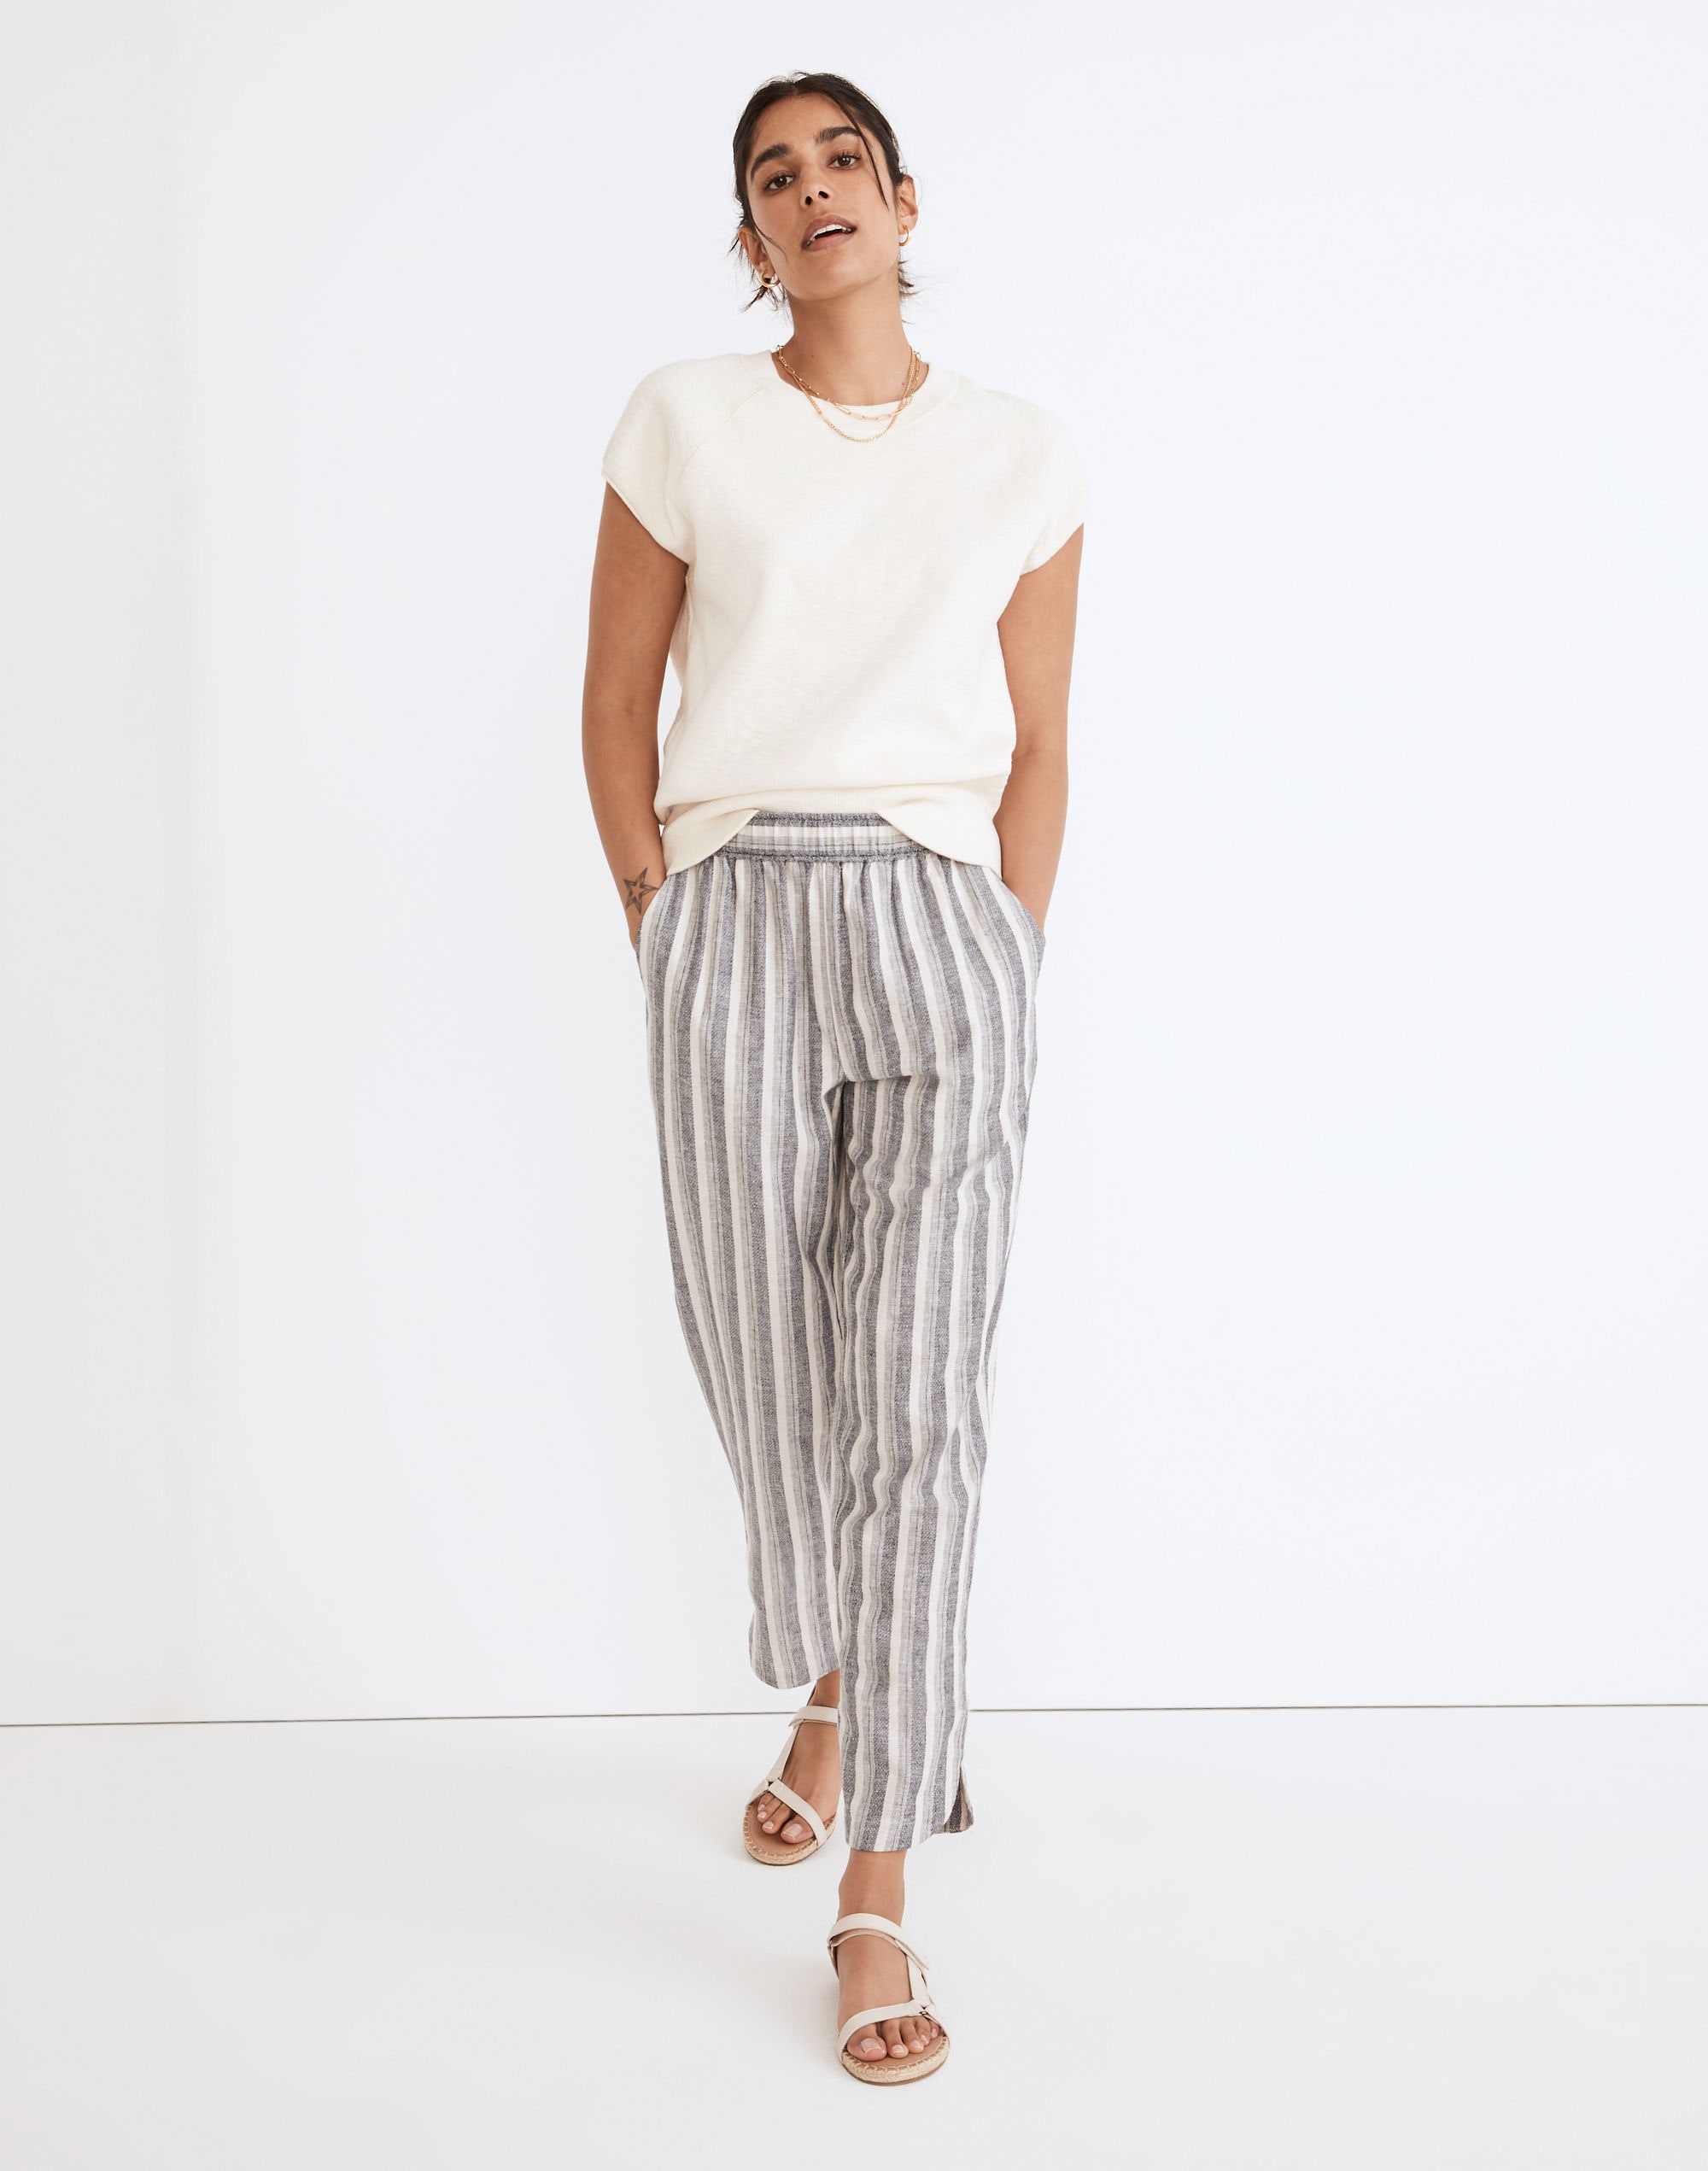 https://www.madewell.com/images/NF096_WY9137_m